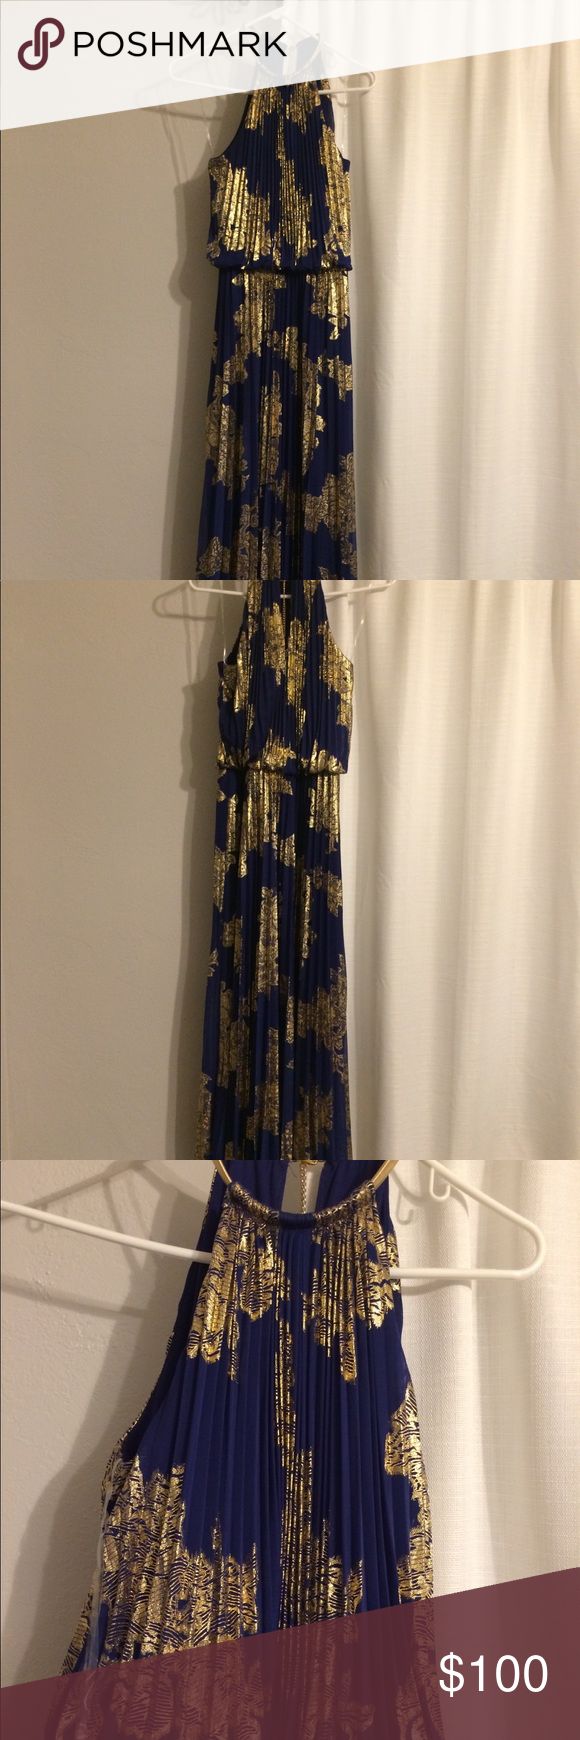 MSK full length size 6 royal blue and gold dress | Blue and gold dress